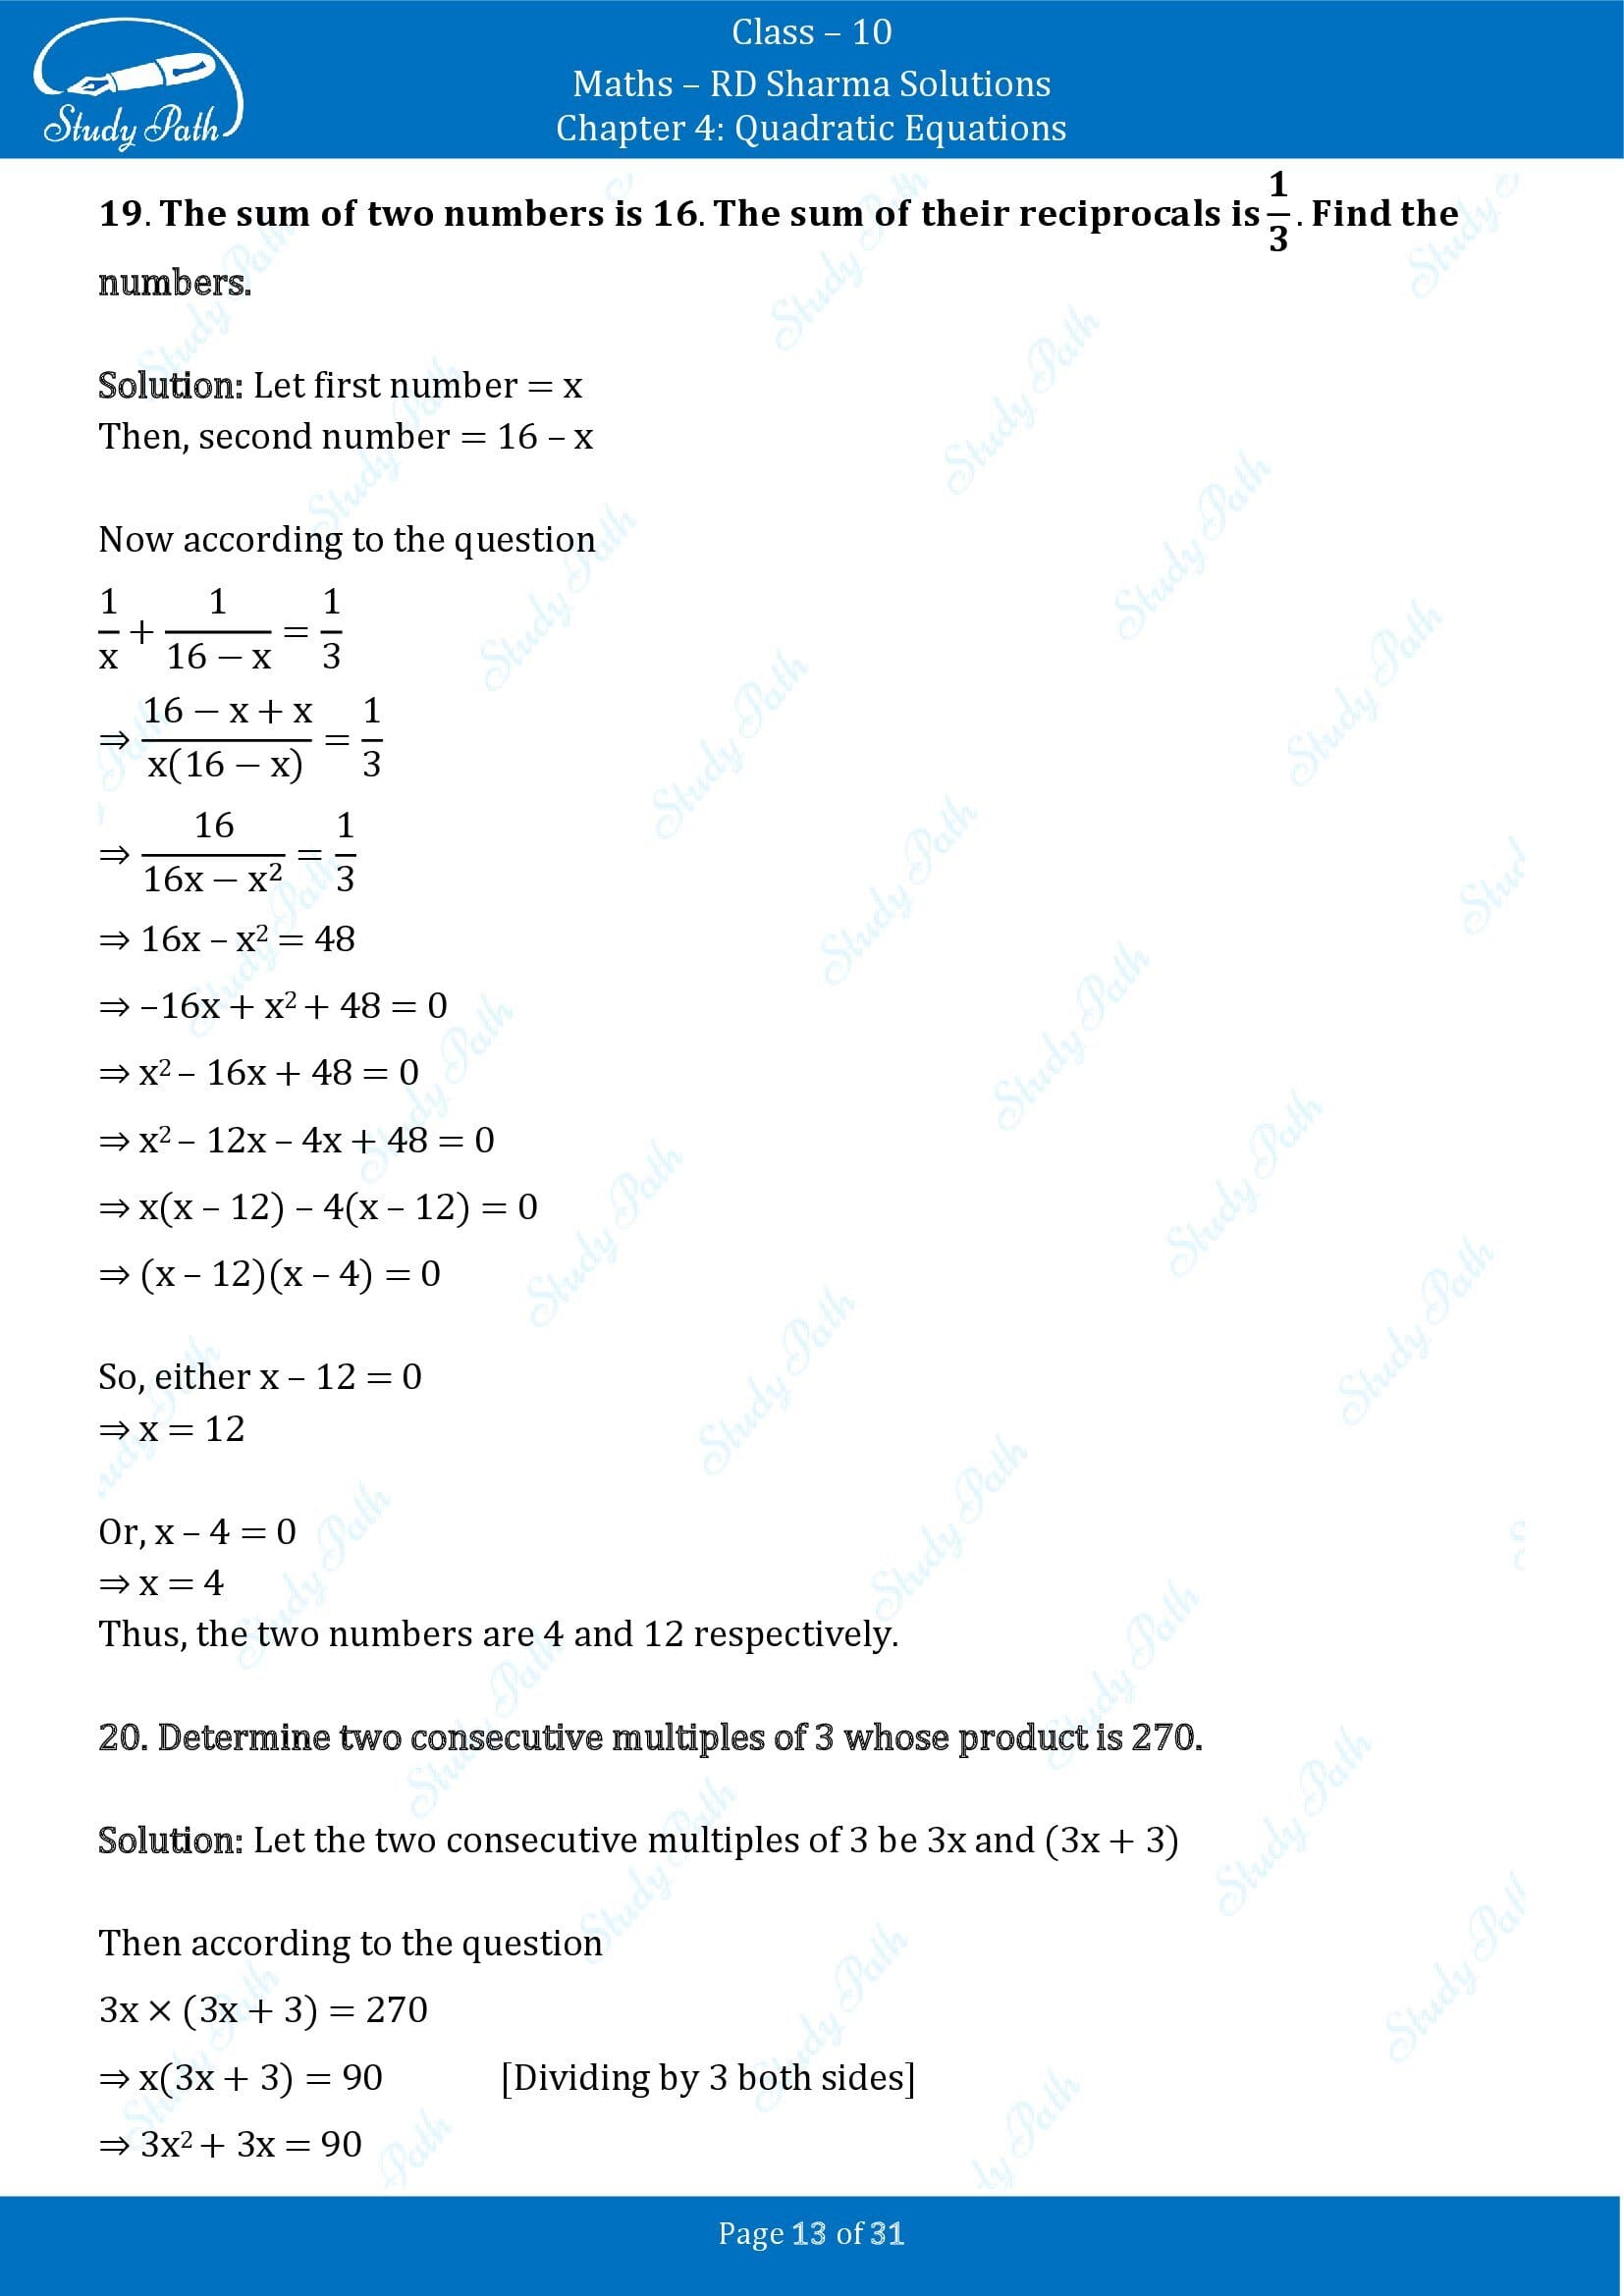 RD Sharma Solutions Class 10 Chapter 4 Quadratic Equations Exercise 4.7 00013